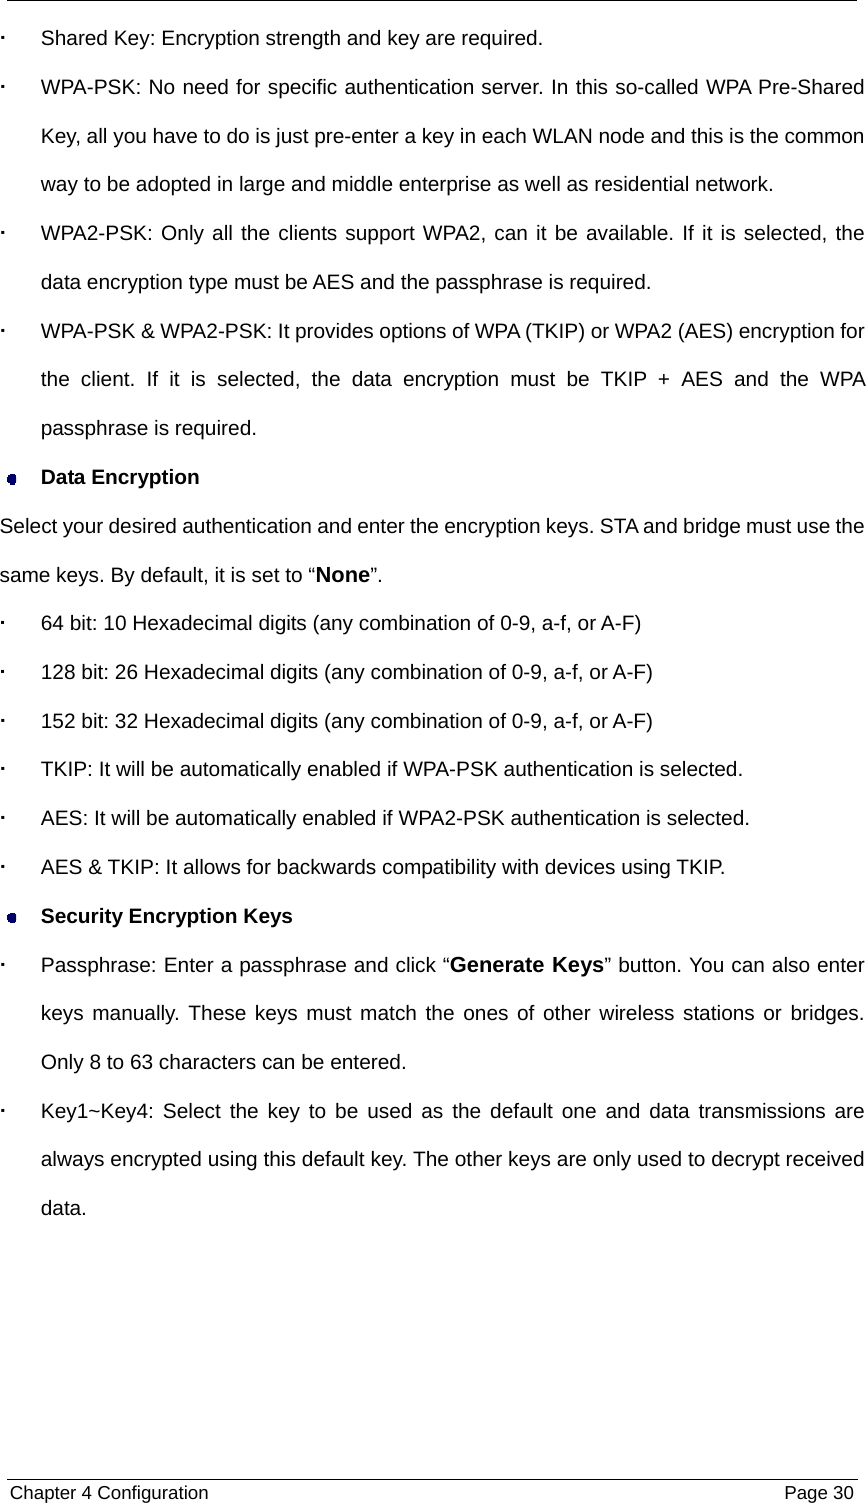  Chapter 4 Configuration  Page 30  Shared Key: Encryption strength and key are required.   WPA-PSK: No need for specific authentication server. In this so-called WPA Pre-Shared Key, all you have to do is just pre-enter a key in each WLAN node and this is the common way to be adopted in large and middle enterprise as well as residential network.   WPA2-PSK: Only all the clients support WPA2, can it be available. If it is selected, the data encryption type must be AES and the passphrase is required.   WPA-PSK &amp; WPA2-PSK: It provides options of WPA (TKIP) or WPA2 (AES) encryption for the client. If it is selected, the data encryption must be TKIP + AES and the WPA passphrase is required.  Data Encryption Select your desired authentication and enter the encryption keys. STA and bridge must use the same keys. By default, it is set to “None”.   64 bit: 10 Hexadecimal digits (any combination of 0-9, a-f, or A-F)   128 bit: 26 Hexadecimal digits (any combination of 0-9, a-f, or A-F)   152 bit: 32 Hexadecimal digits (any combination of 0-9, a-f, or A-F)   TKIP: It will be automatically enabled if WPA-PSK authentication is selected.   AES: It will be automatically enabled if WPA2-PSK authentication is selected.     AES &amp; TKIP: It allows for backwards compatibility with devices using TKIP.  Security Encryption Keys   Passphrase: Enter a passphrase and click “Generate Keys” button. You can also enter keys manually. These keys must match the ones of other wireless stations or bridges. Only 8 to 63 characters can be entered.   Key1~Key4: Select the key to be used as the default one and data transmissions are always encrypted using this default key. The other keys are only used to decrypt received data. 